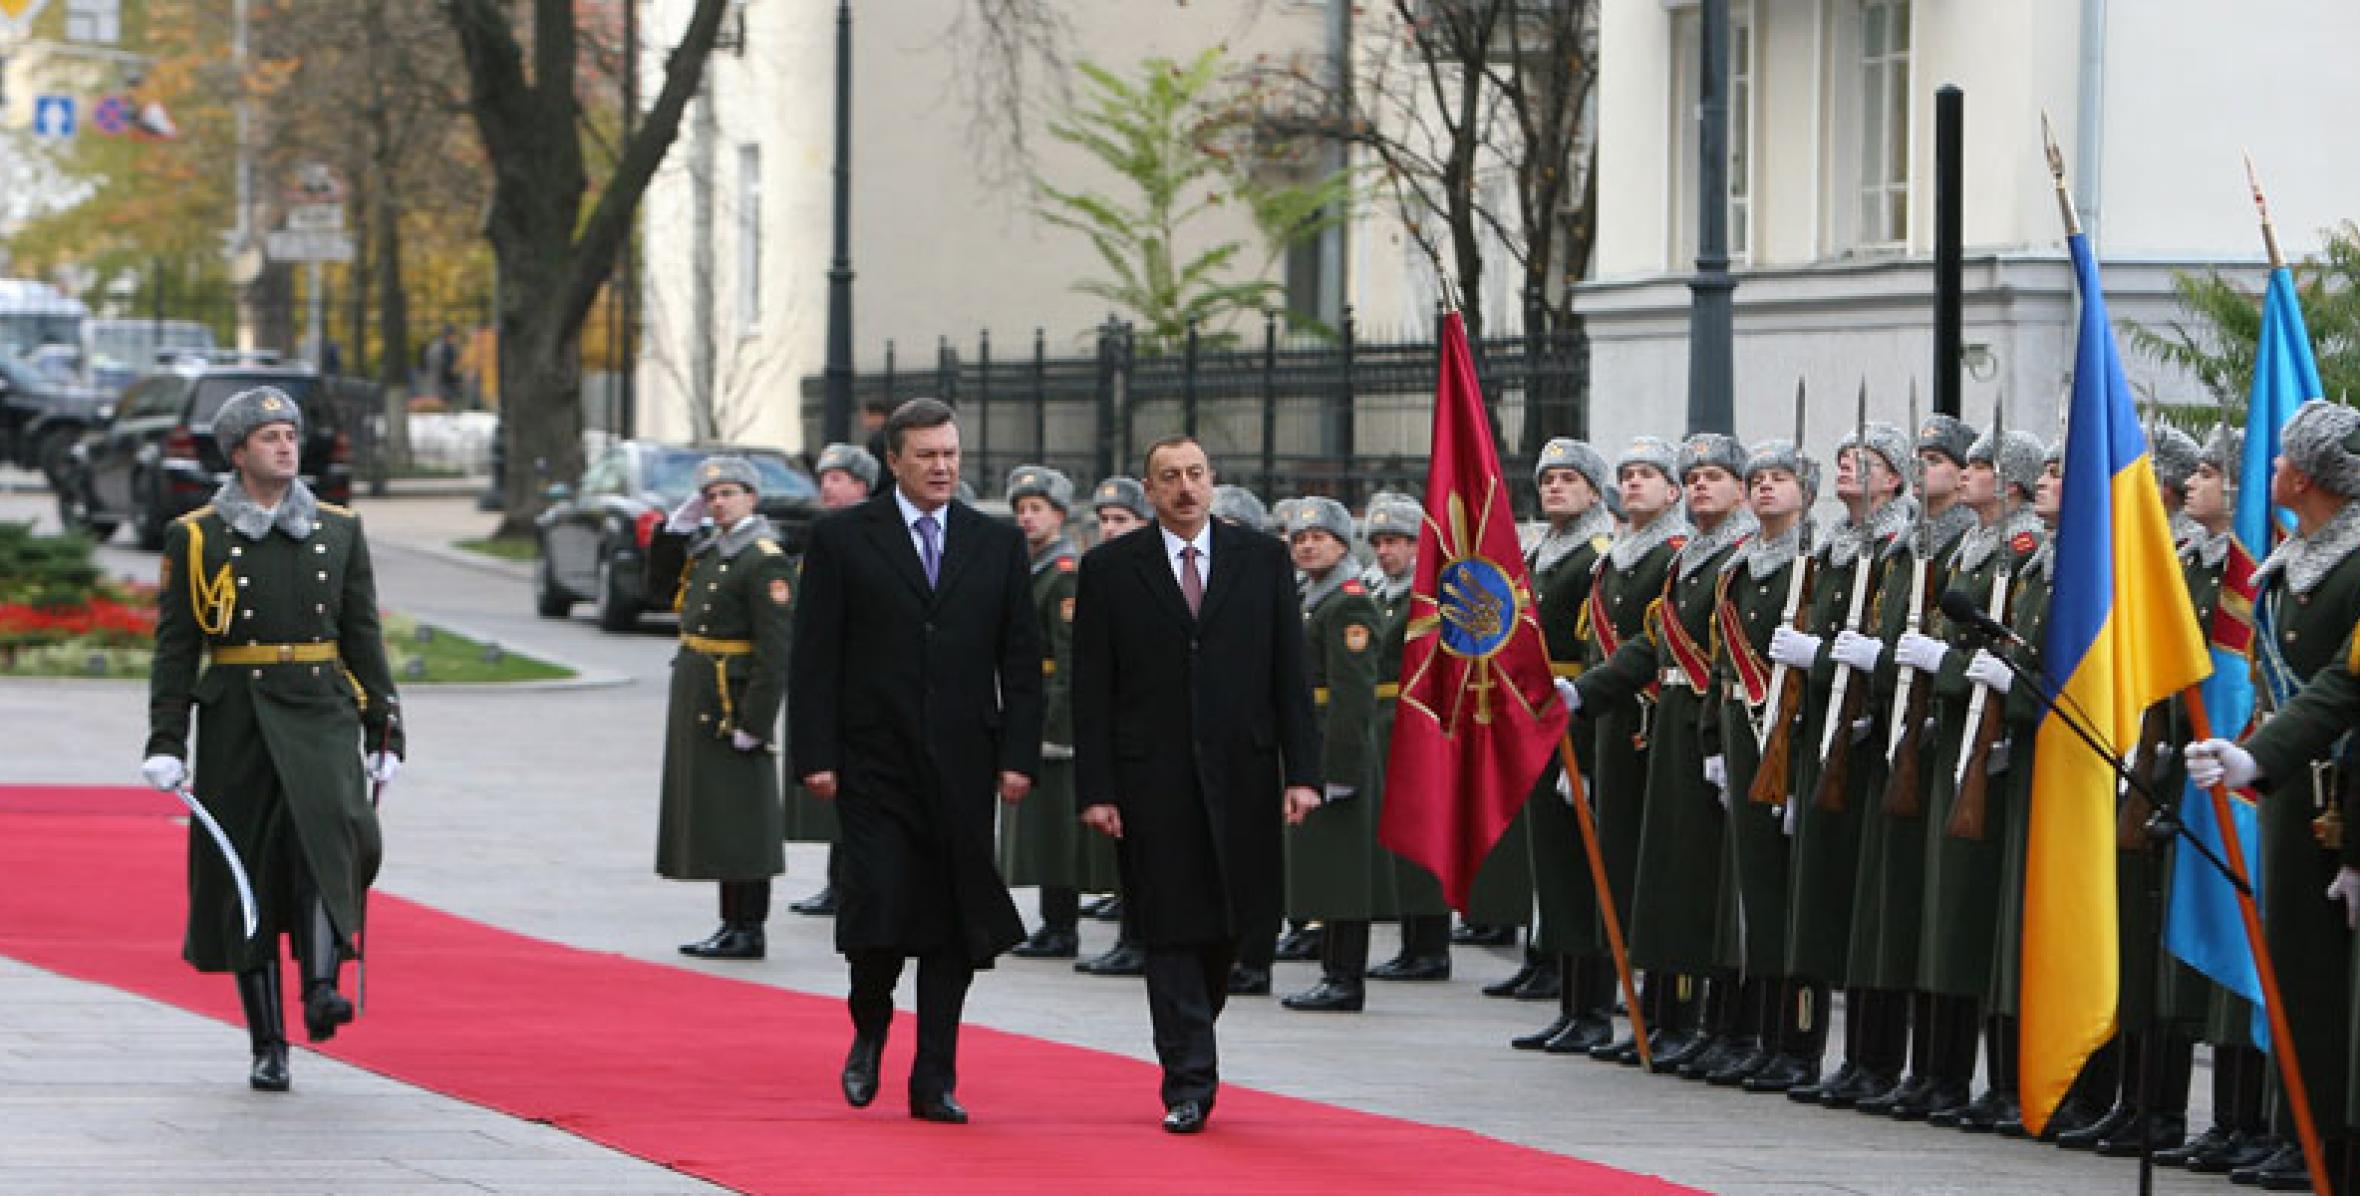 Official welcoming ceremony of Ilham Aliyev took place in Kiev